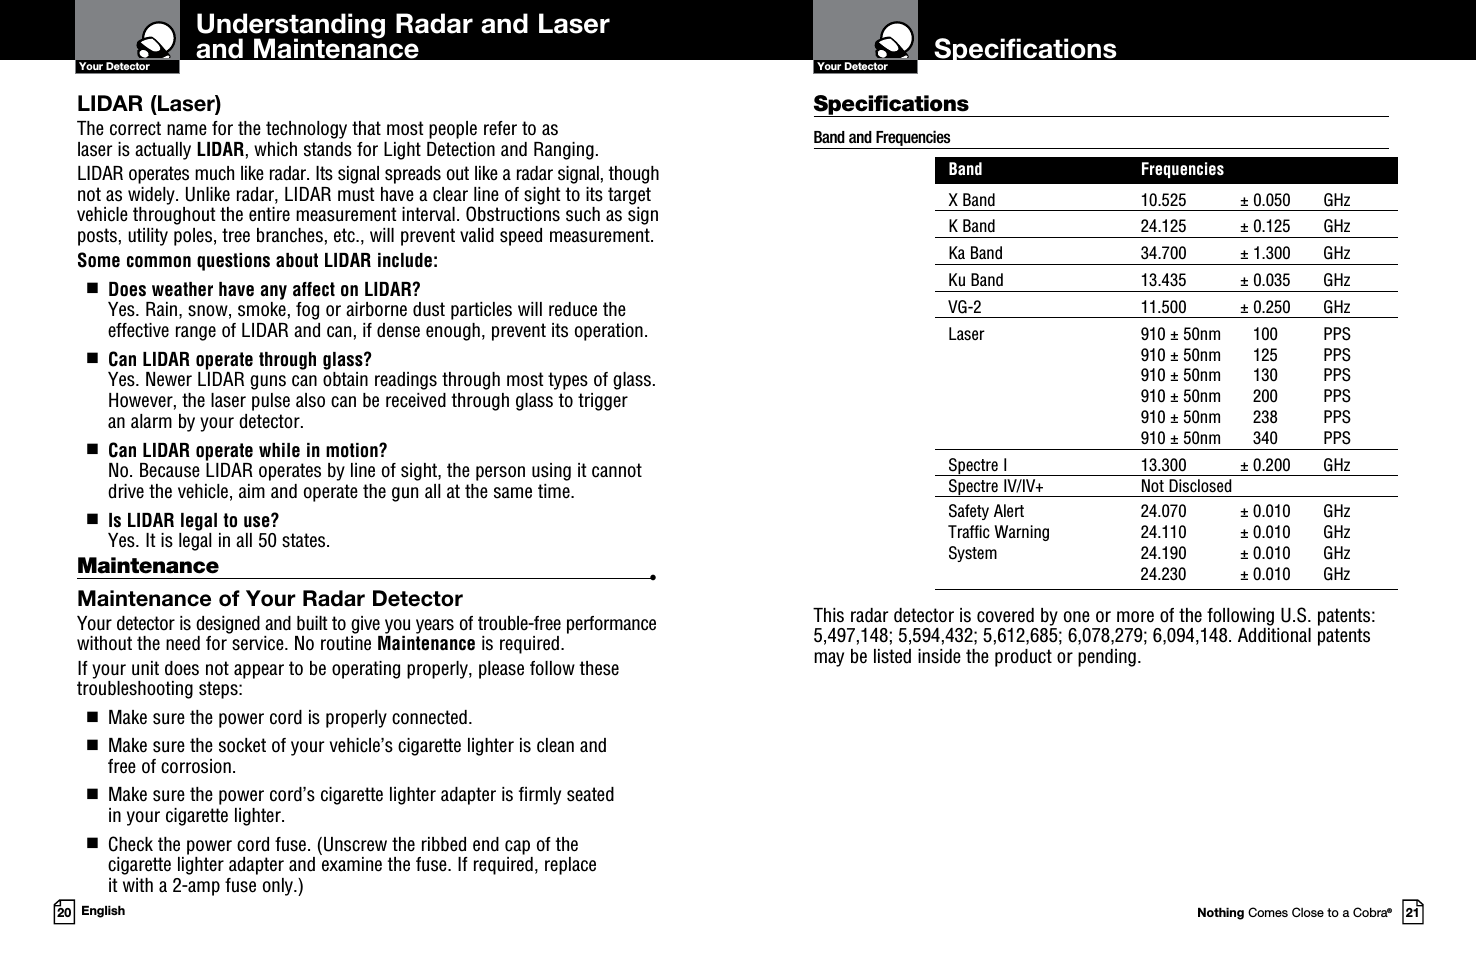 SpecificationsNothing Comes Close to a Cobra®21Understanding Radar and Laser  and Maintenance20 EnglishYour DetectorYour DetectorLIDAR (Laser)The correct name for the technology that most people refer to as  laser is actually LIDAR, which stands for Light Detection and Ranging.LIDAR operates much like radar. Its signal spreads out like a radar signal, though not as widely. Unlike radar, LIDAR must have a clear line of sight to its target vehicle throughout the entire measurement interval. Obstructions such as sign posts, utility poles, tree branches, etc., will prevent valid speed measurement.Some common questions about LIDAR include:  g   Does weather have any affect on LIDAR?  Yes. Rain, snow, smoke, fog or airborne dust particles will reduce the  effective range of LIDAR and can, if dense enough, prevent its operation.  g   Can LIDAR operate through glass? Yes. Newer LIDAR guns can obtain readings through most types of glass. However, the laser pulse also can be received through glass to trigger  an alarm by your detector.  g   Can LIDAR operate while in motion? No. Because LIDAR operates by line of sight, the person using it cannot drive the vehicle, aim and operate the gun all at the same time.  g   Is LIDAR legal to use? Yes. It is legal in all 50 states.Maintenance  •Maintenance of Your Radar DetectorYour detector is designed and built to give you years of trouble-free performance without the need for service. No routine Maintenance is required.If your unit does not appear to be operating properly, please follow these troubleshooting steps:  g   Make sure the power cord is properly connected.  g    Make sure the socket of your vehicle’s cigarette lighter is clean and  free of corrosion.  g   Make sure the power cord’s cigarette lighter adapter is firmly seated  in your cigarette lighter.  g   Check the power cord fuse. (Unscrew the ribbed end cap of the  cigarette lighter adapter and examine the fuse. If required, replace  it with a 2-amp fuse only.)SpecificationsBand and Frequencies  Band  Frequencies  X Band  10.525  ± 0.050  GHz  K Band  24.125  ± 0.125  GHz  Ka Band  34.700  ± 1.300  GHz  Ku Band  13.435  ± 0.035  GHz  VG-2  11.500  ± 0.250  GHz  Laser  910 ± 50nm  100  PPS     910 ± 50nm  125  PPS     910 ± 50nm  130  PPS     910 ± 50nm  200  PPS     910 ± 50nm  238  PPS     910 ± 50nm  340  PPS  Spectre I  13.300  ± 0.200  GHz  Spectre IV/IV+  Not Disclosed Safety Alert  24.070  ± 0.010  GHz  Traffic Warning  24.110  ± 0.010  GHz  System  24.190  ± 0.010  GHz    24.230  ± 0.010  GHz  This radar detector is covered by one or more of the following U.S. patents: 5,497,148; 5,594,432; 5,612,685; 6,078,279; 6,094,148. Additional patents may be listed inside the product or pending. 